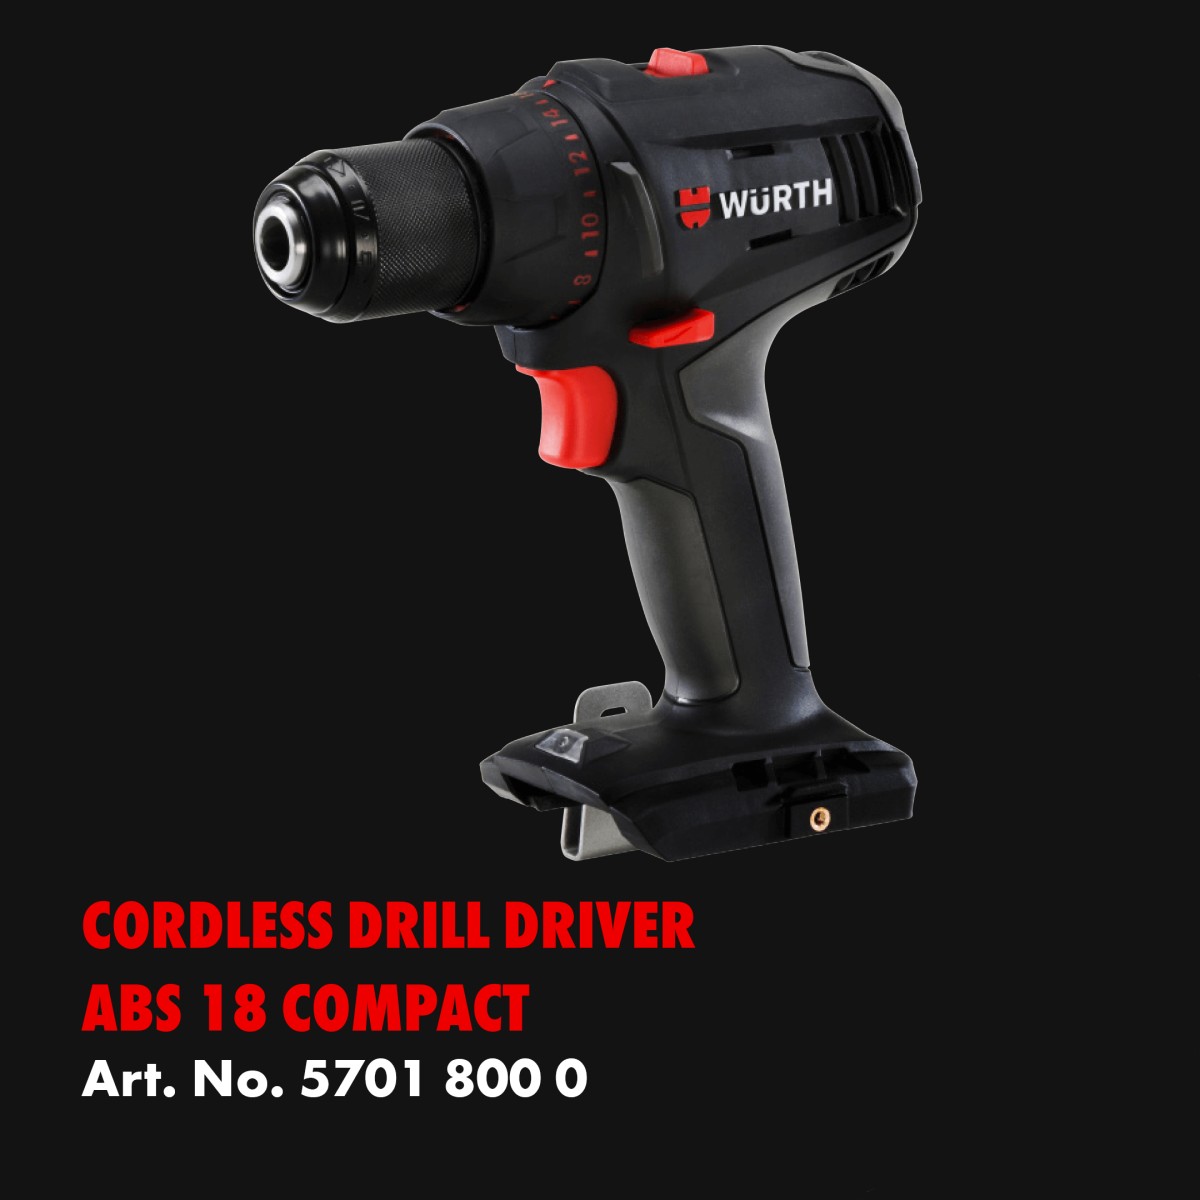 Cordless Drill Driver ABS-18 Compact